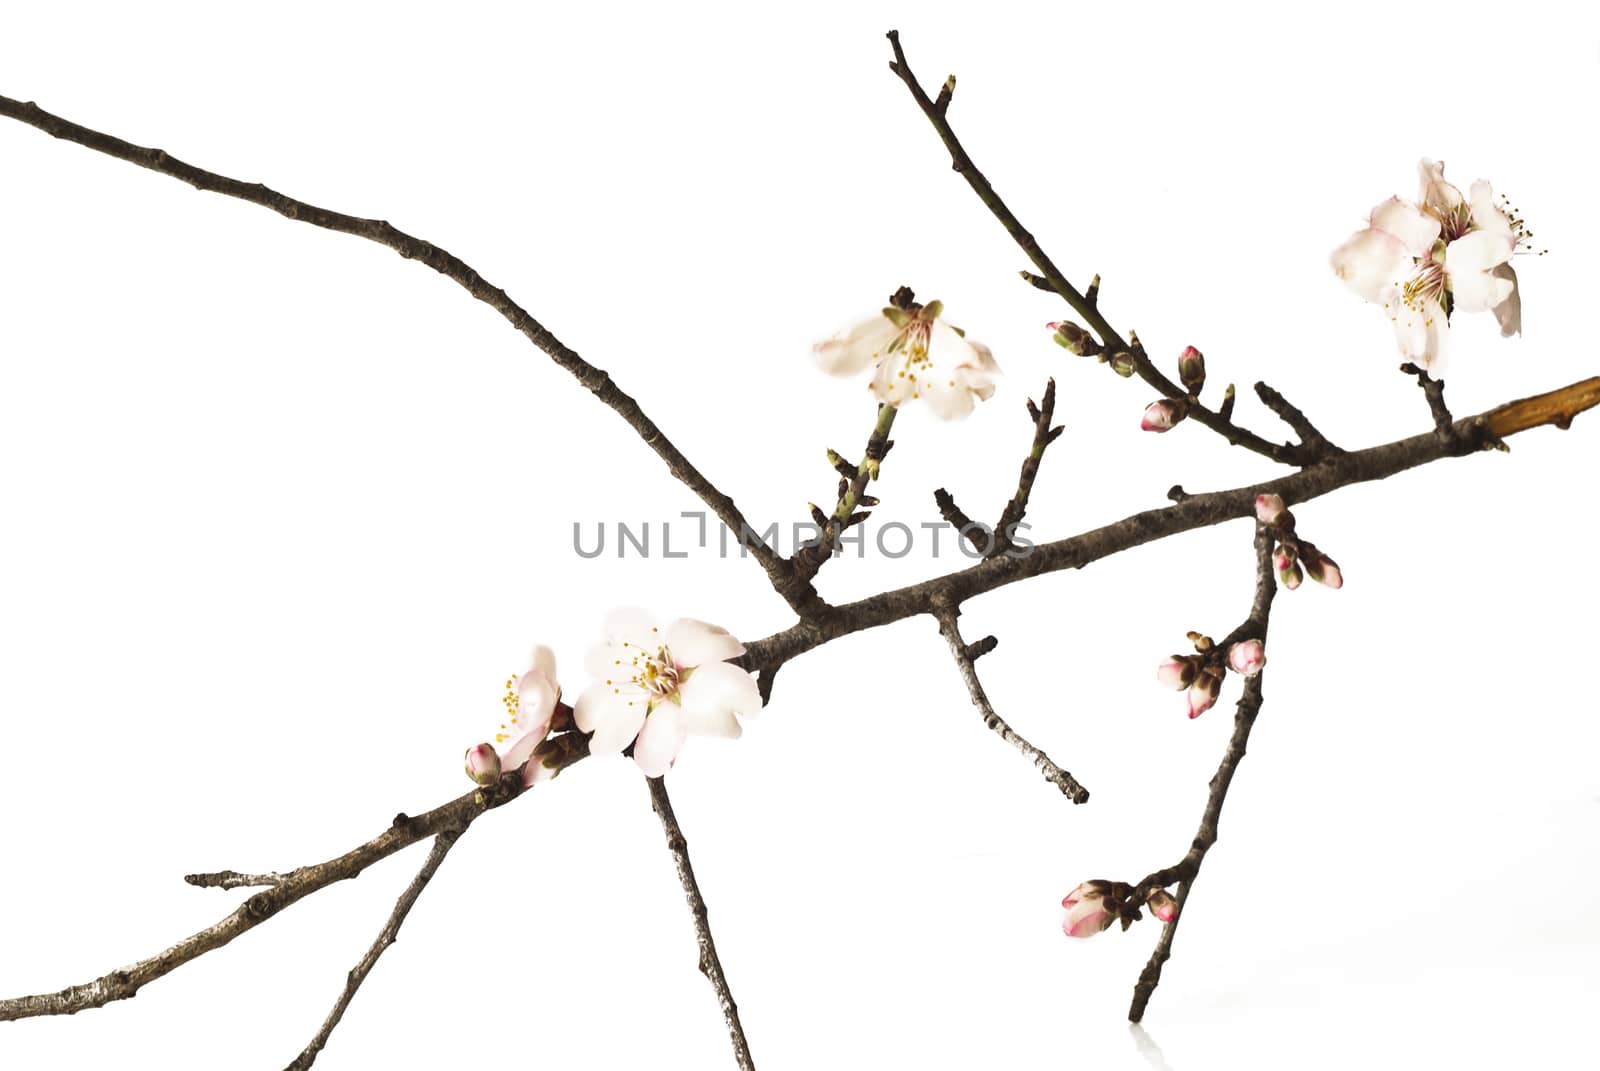 The almond tree pink flowers with branches by gandolfocannatella